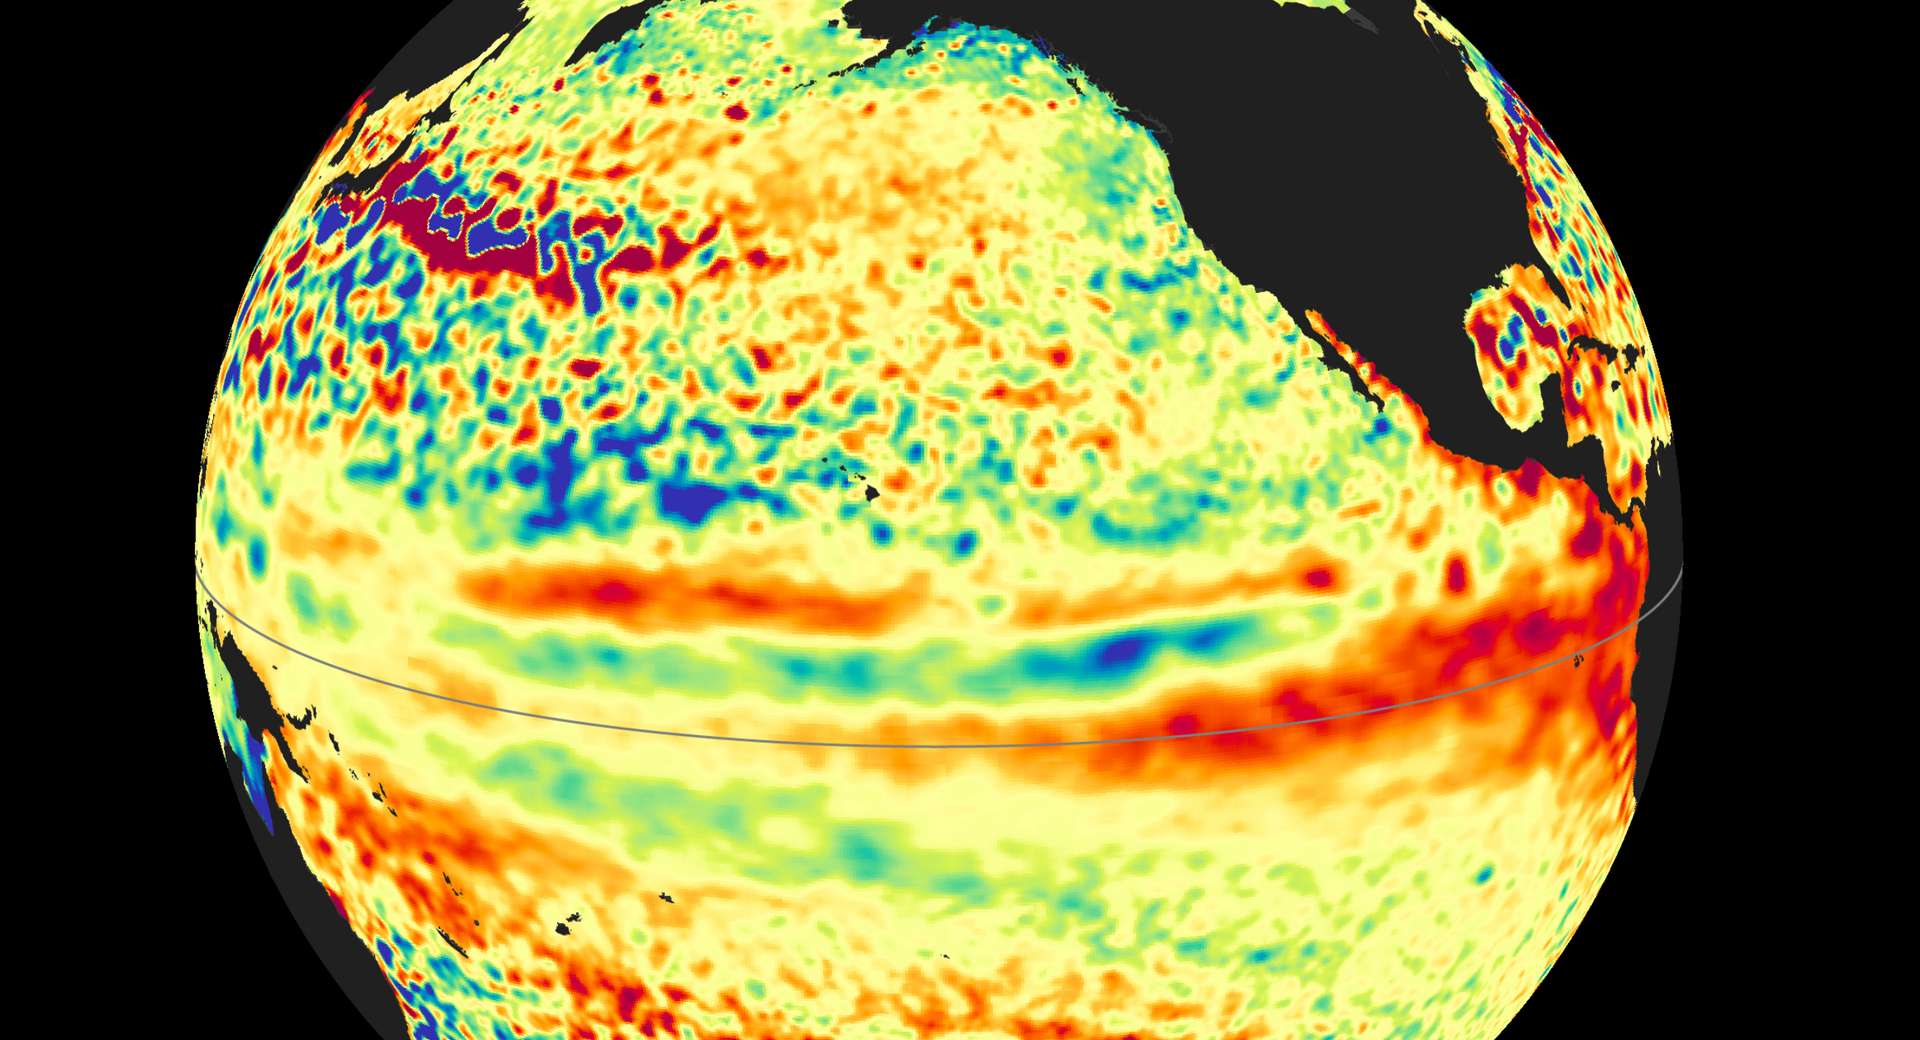 Is the El Niño phenomenon the reason behind the heat waves sweeping the world now?